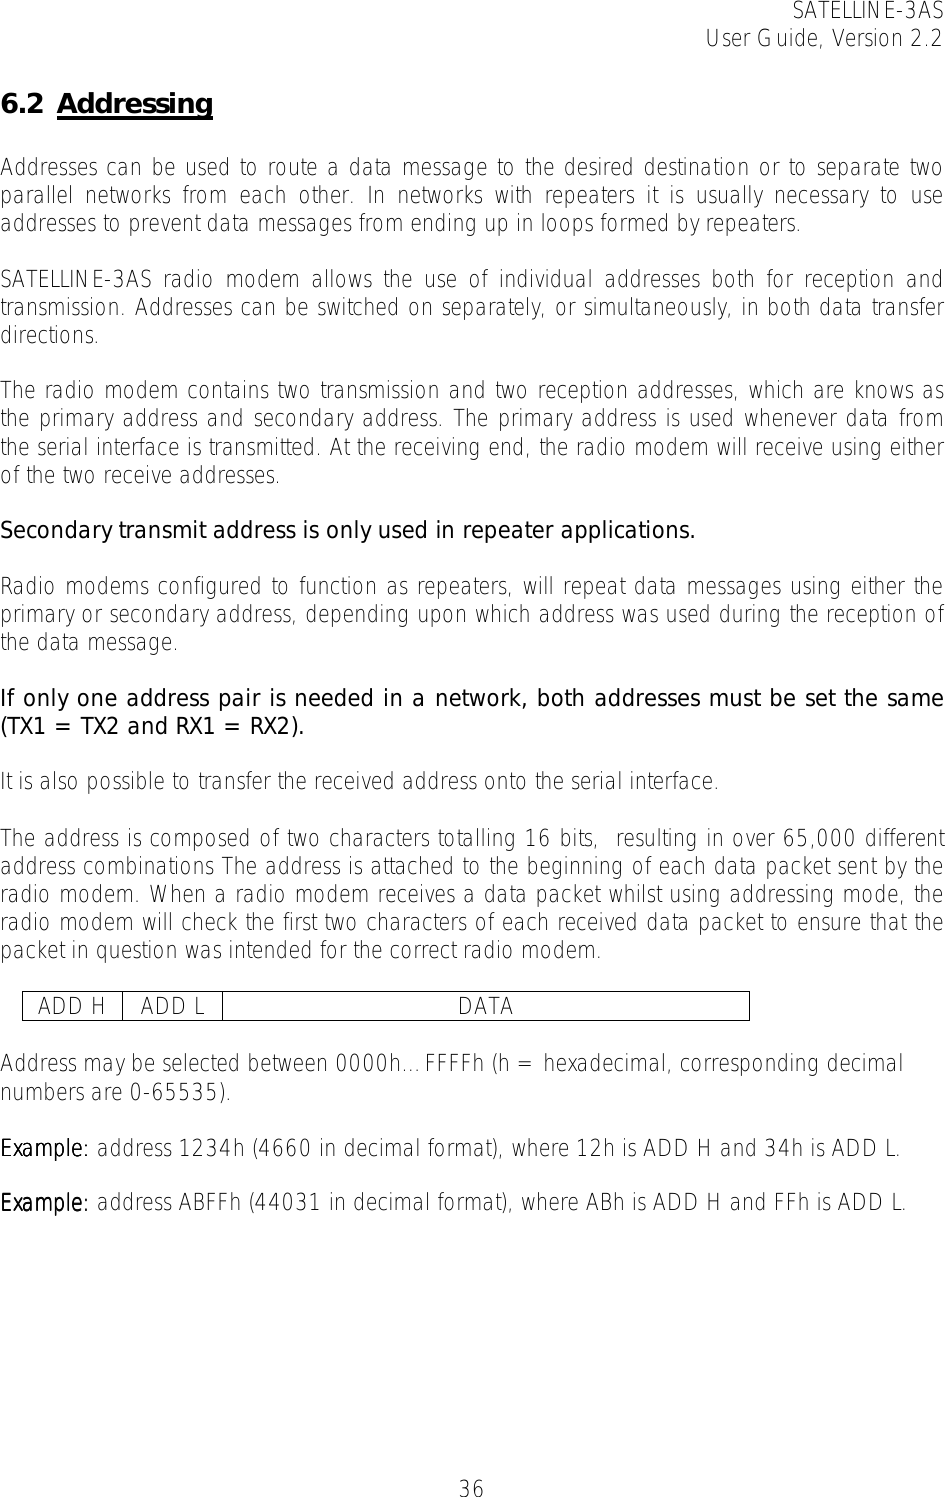 SATELLINE-3AS User Guide, Version 2.2   366.2 Addressing  Addresses can be used to route a data message to the desired destination or to separate two parallel networks from each other. In networks with repeaters it is usually necessary to use addresses to prevent data messages from ending up in loops formed by repeaters.   SATELLINE-3AS radio modem allows the use of individual addresses both for reception and transmission. Addresses can be switched on separately, or simultaneously, in both data transfer directions.   The radio modem contains two transmission and two reception addresses, which are knows as the primary address and secondary address. The primary address is used whenever data from the serial interface is transmitted. At the receiving end, the radio modem will receive using either of the two receive addresses.   Secondary transmit address is only used in repeater applications.  Radio modems configured to function as repeaters, will repeat data messages using either the primary or secondary address, depending upon which address was used during the reception of the data message.   If only one address pair is needed in a network, both addresses must be set the same (TX1 = TX2 and RX1 = RX2).   It is also possible to transfer the received address onto the serial interface.  The address is composed of two characters totalling 16 bits,  resulting in over 65,000 different address combinations The address is attached to the beginning of each data packet sent by the radio modem. When a radio modem receives a data packet whilst using addressing mode, the radio modem will check the first two characters of each received data packet to ensure that the packet in question was intended for the correct radio modem.    ADD H  ADD L  DATA  Address may be selected between 0000h…FFFFh (h = hexadecimal, corresponding decimal numbers are 0-65535).   Example:Example:Example:Example: address 1234h (4660 in decimal format), where 12h is ADD H and 34h is ADD L.  Example:Example:Example:Example: address ABFFh (44031 in decimal format), where ABh is ADD H and FFh is ADD L.  